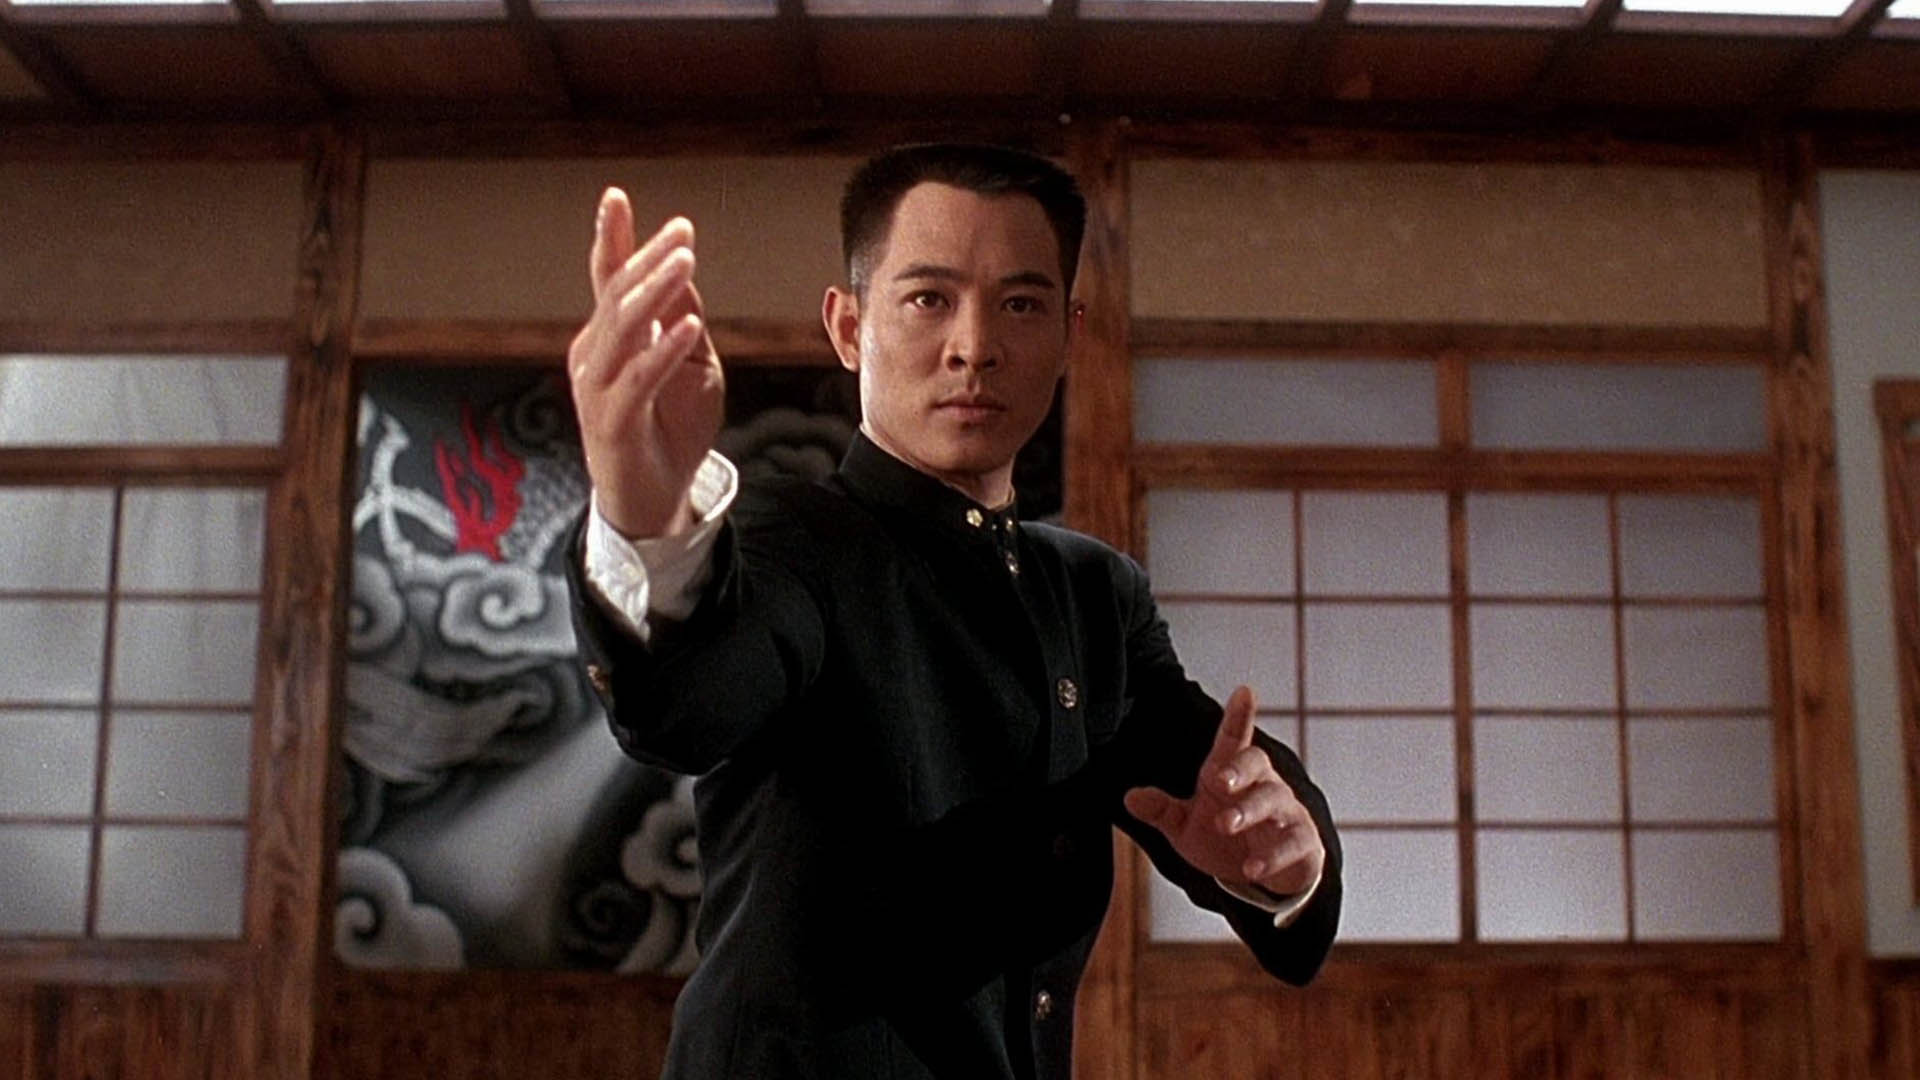 Jet Lee in the movie Fist of Legend